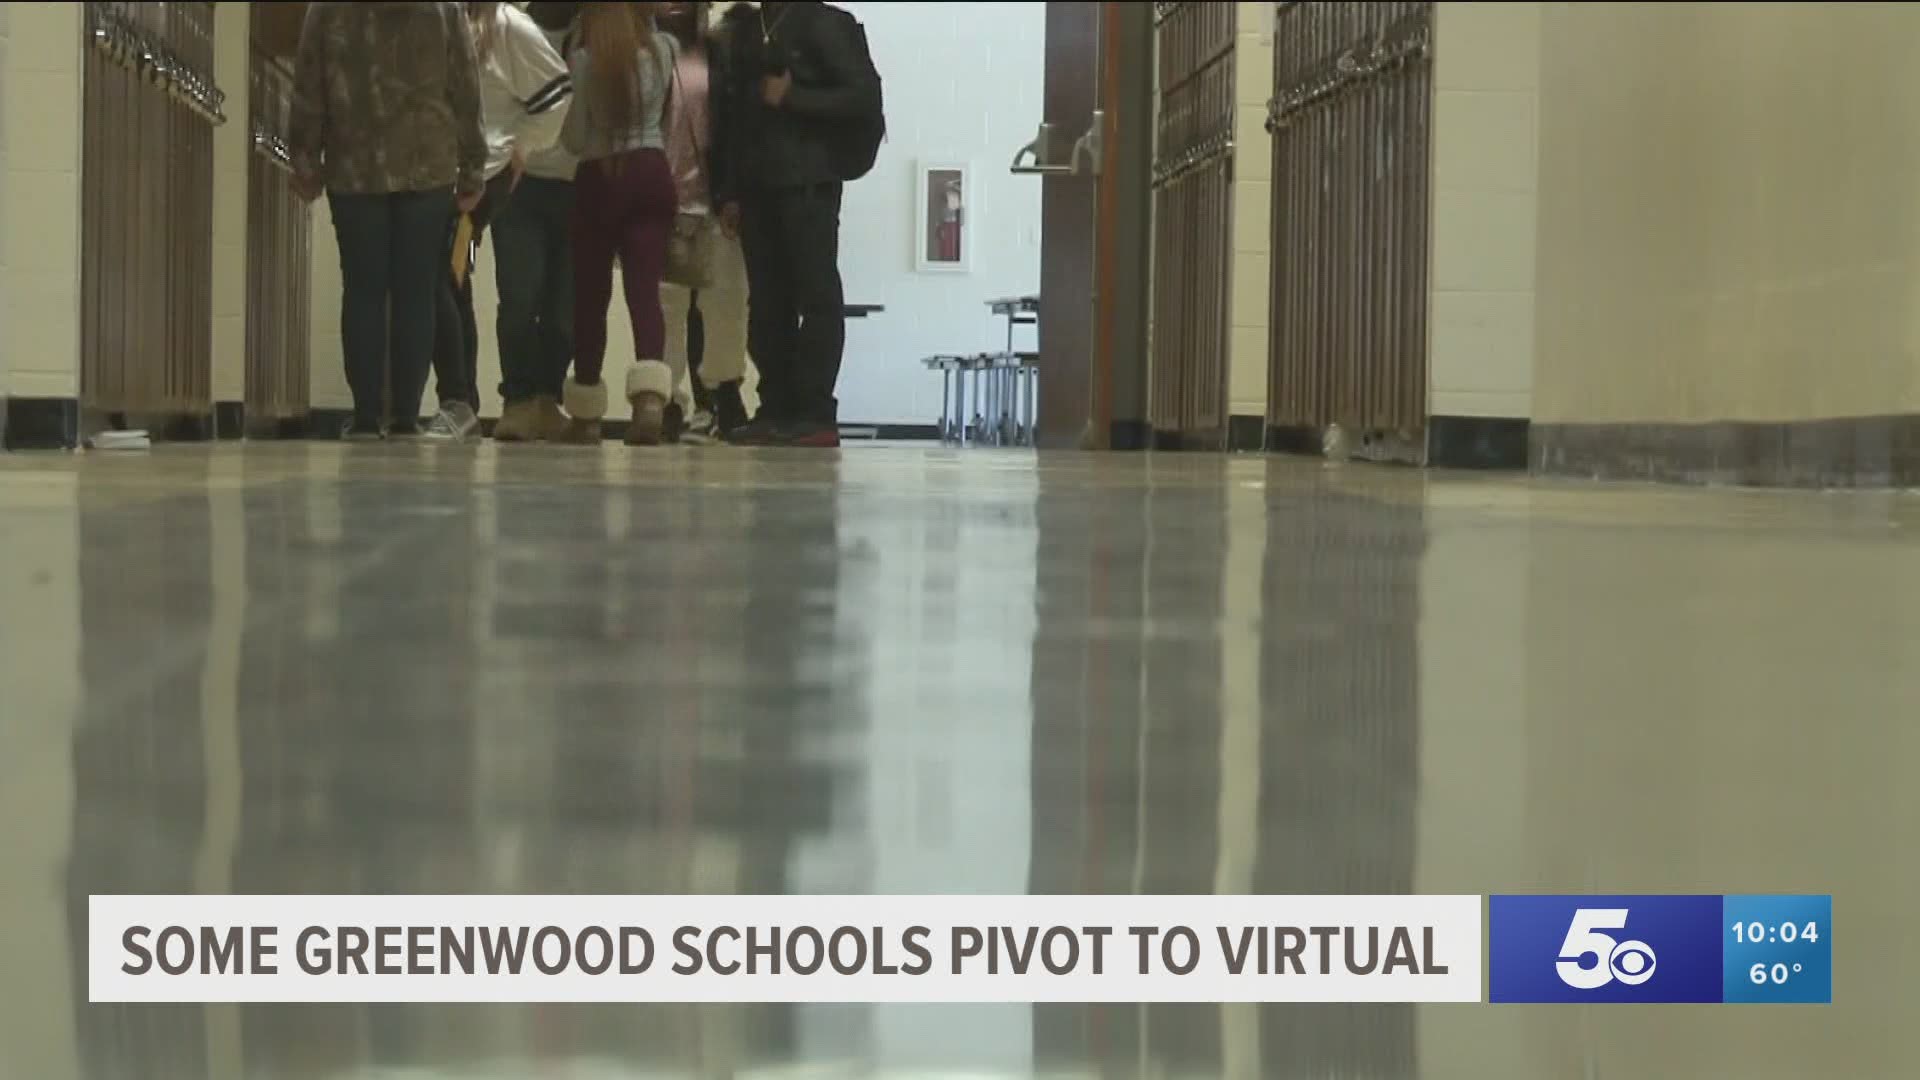 Greenwood High School, the Greenwood Freshmen Center and Greenwood Jr High School will pivot to online learning for two days starting Thursday, Oct. 8.